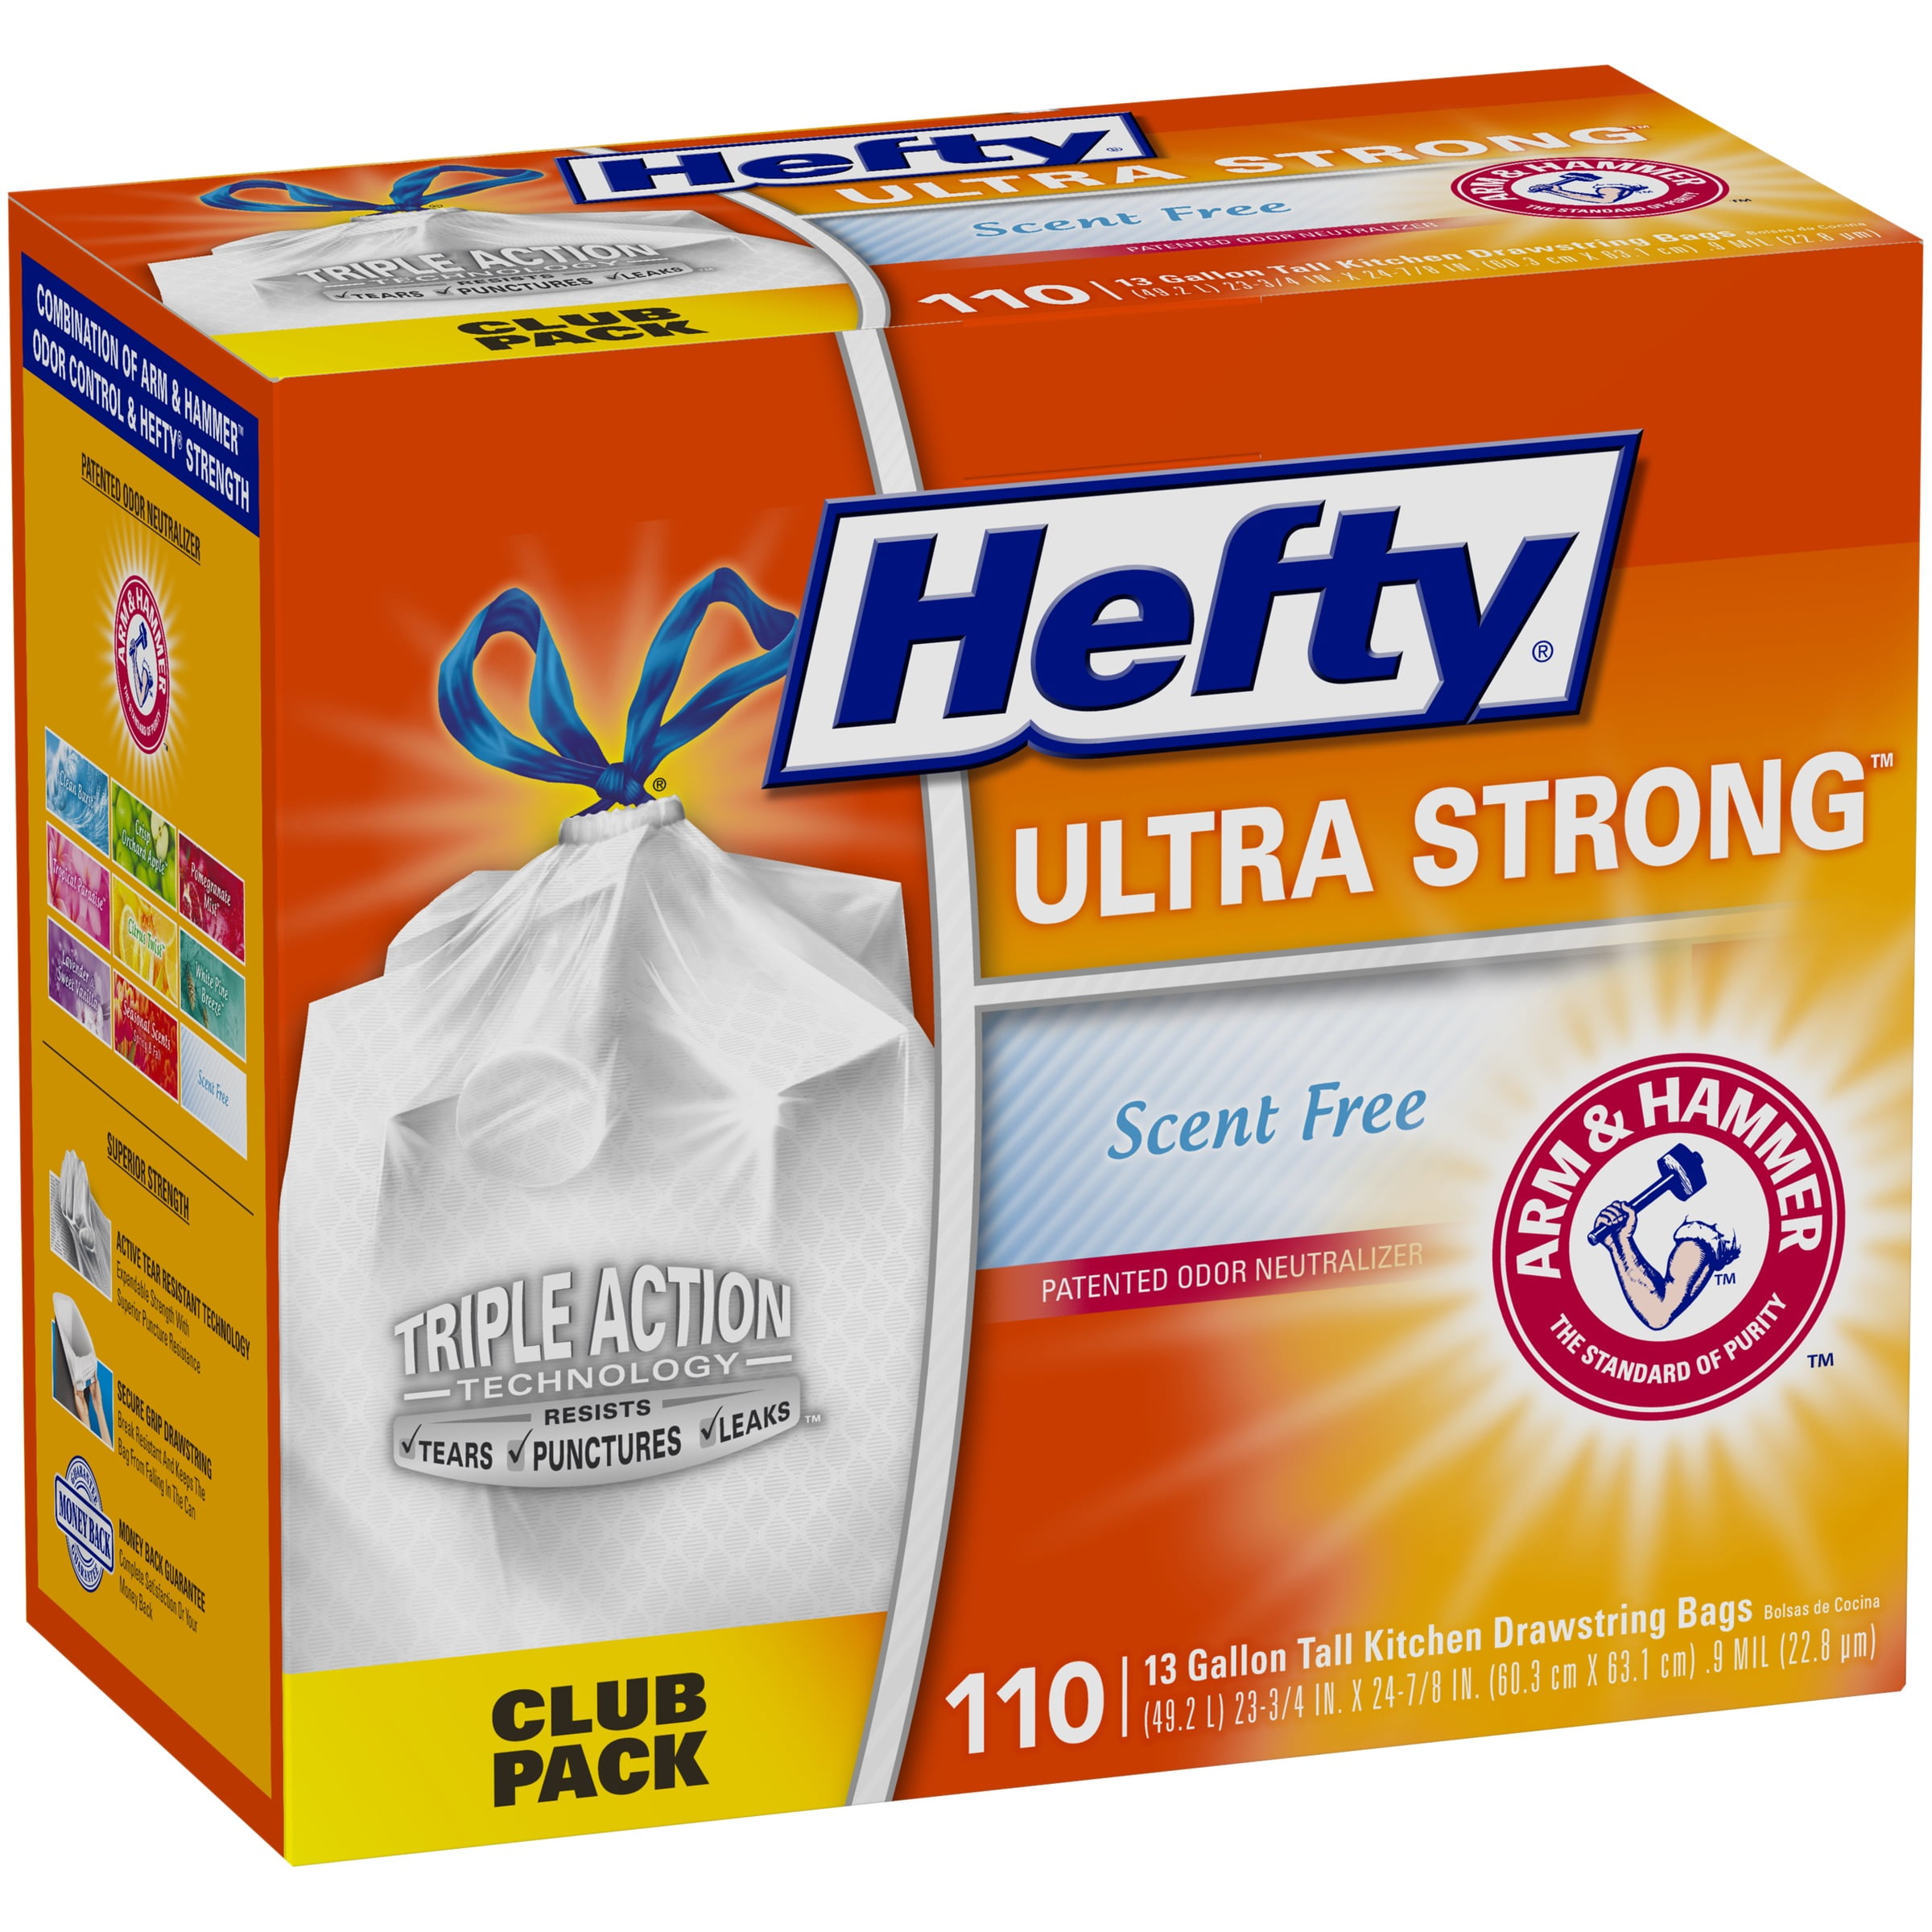 Hefty 10013700016704 Ultra Strong Trash Bags (Clean Burst, Tall Kitchen  Drawstring, 13 Gallon, 80 Count) – Fits All Simplehuman Size J Cans, (Pack  of 1), White 